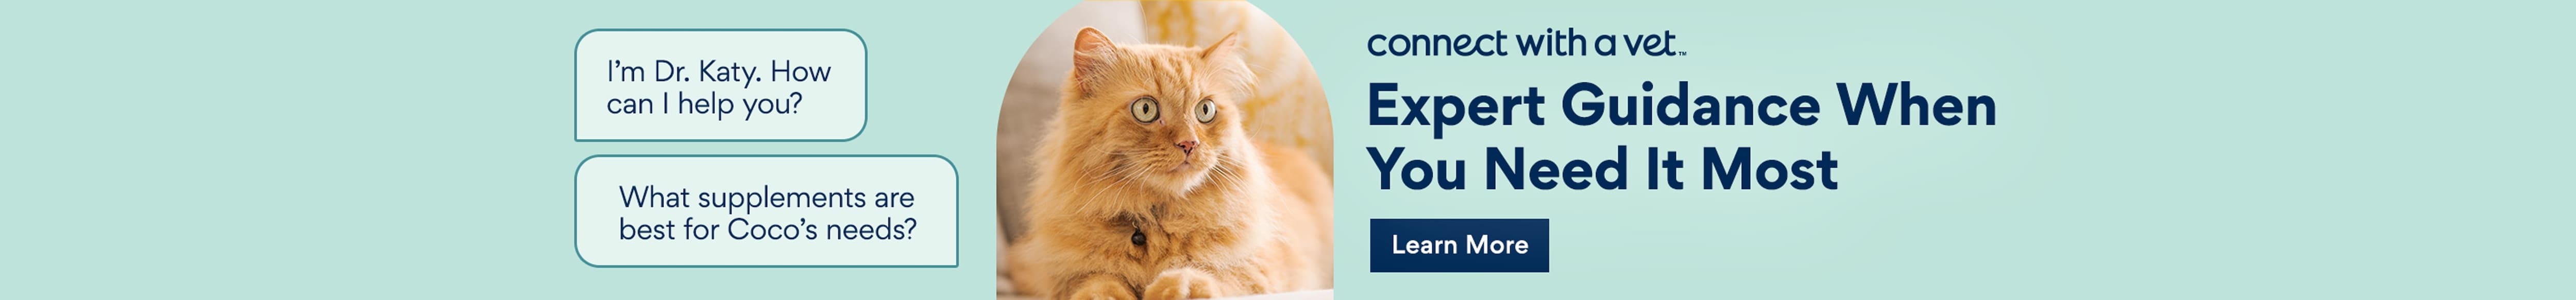 Connect with a Vet. Expert guidance when you need it most.